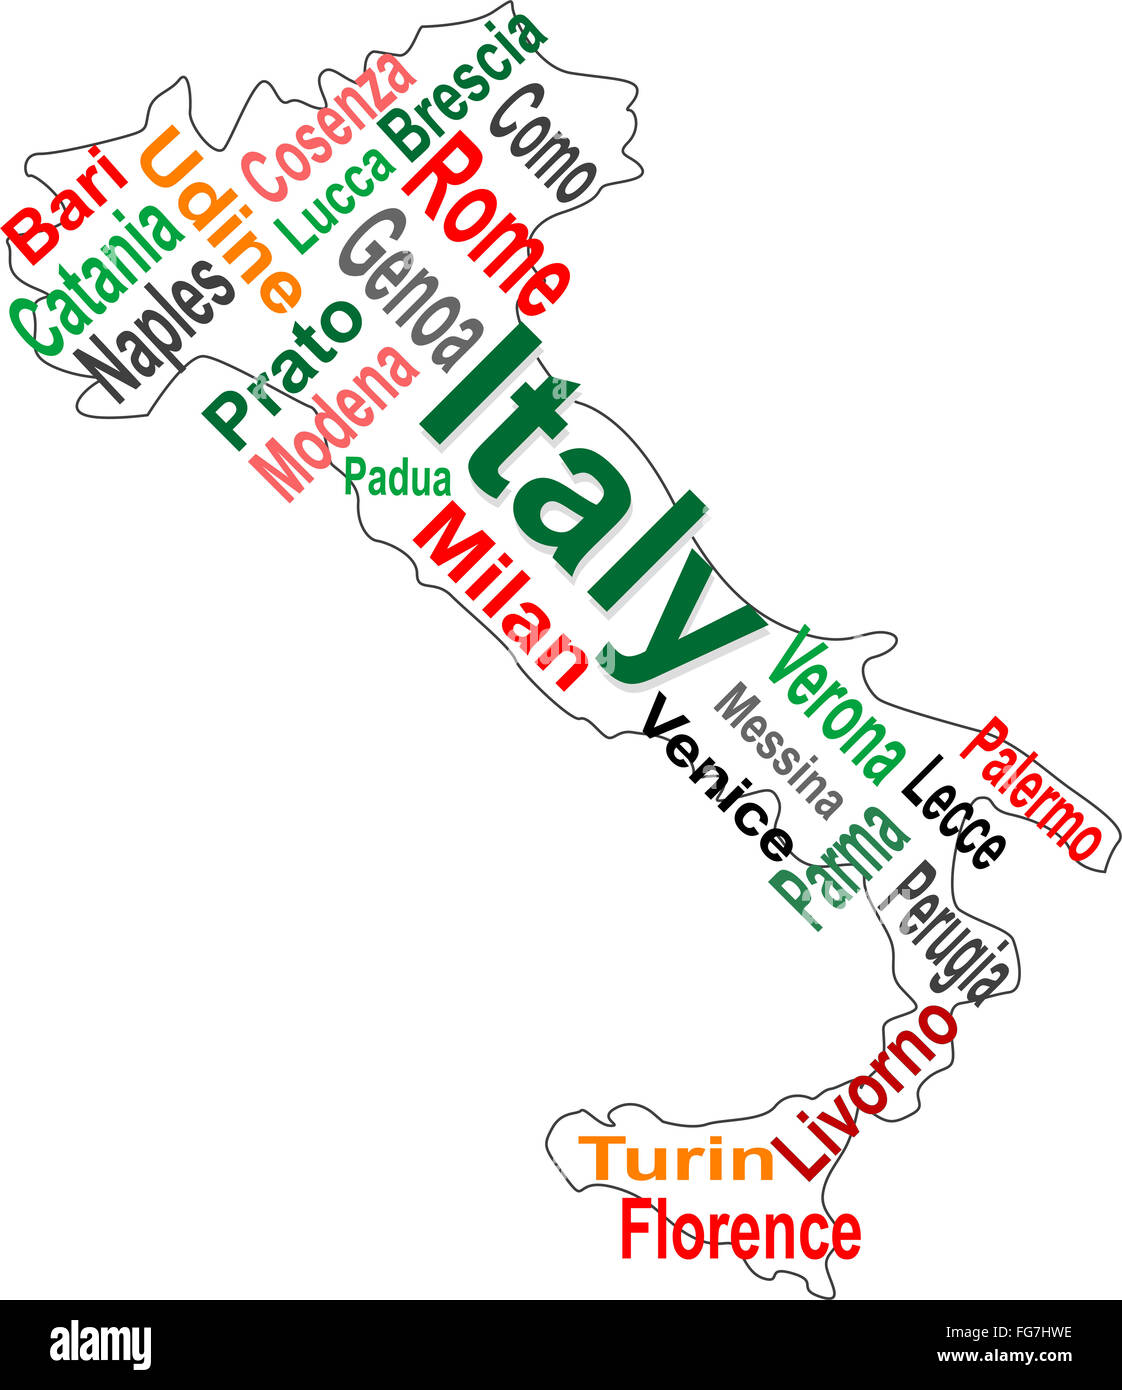 Italy map and words cloud with larger cities Stock Photo